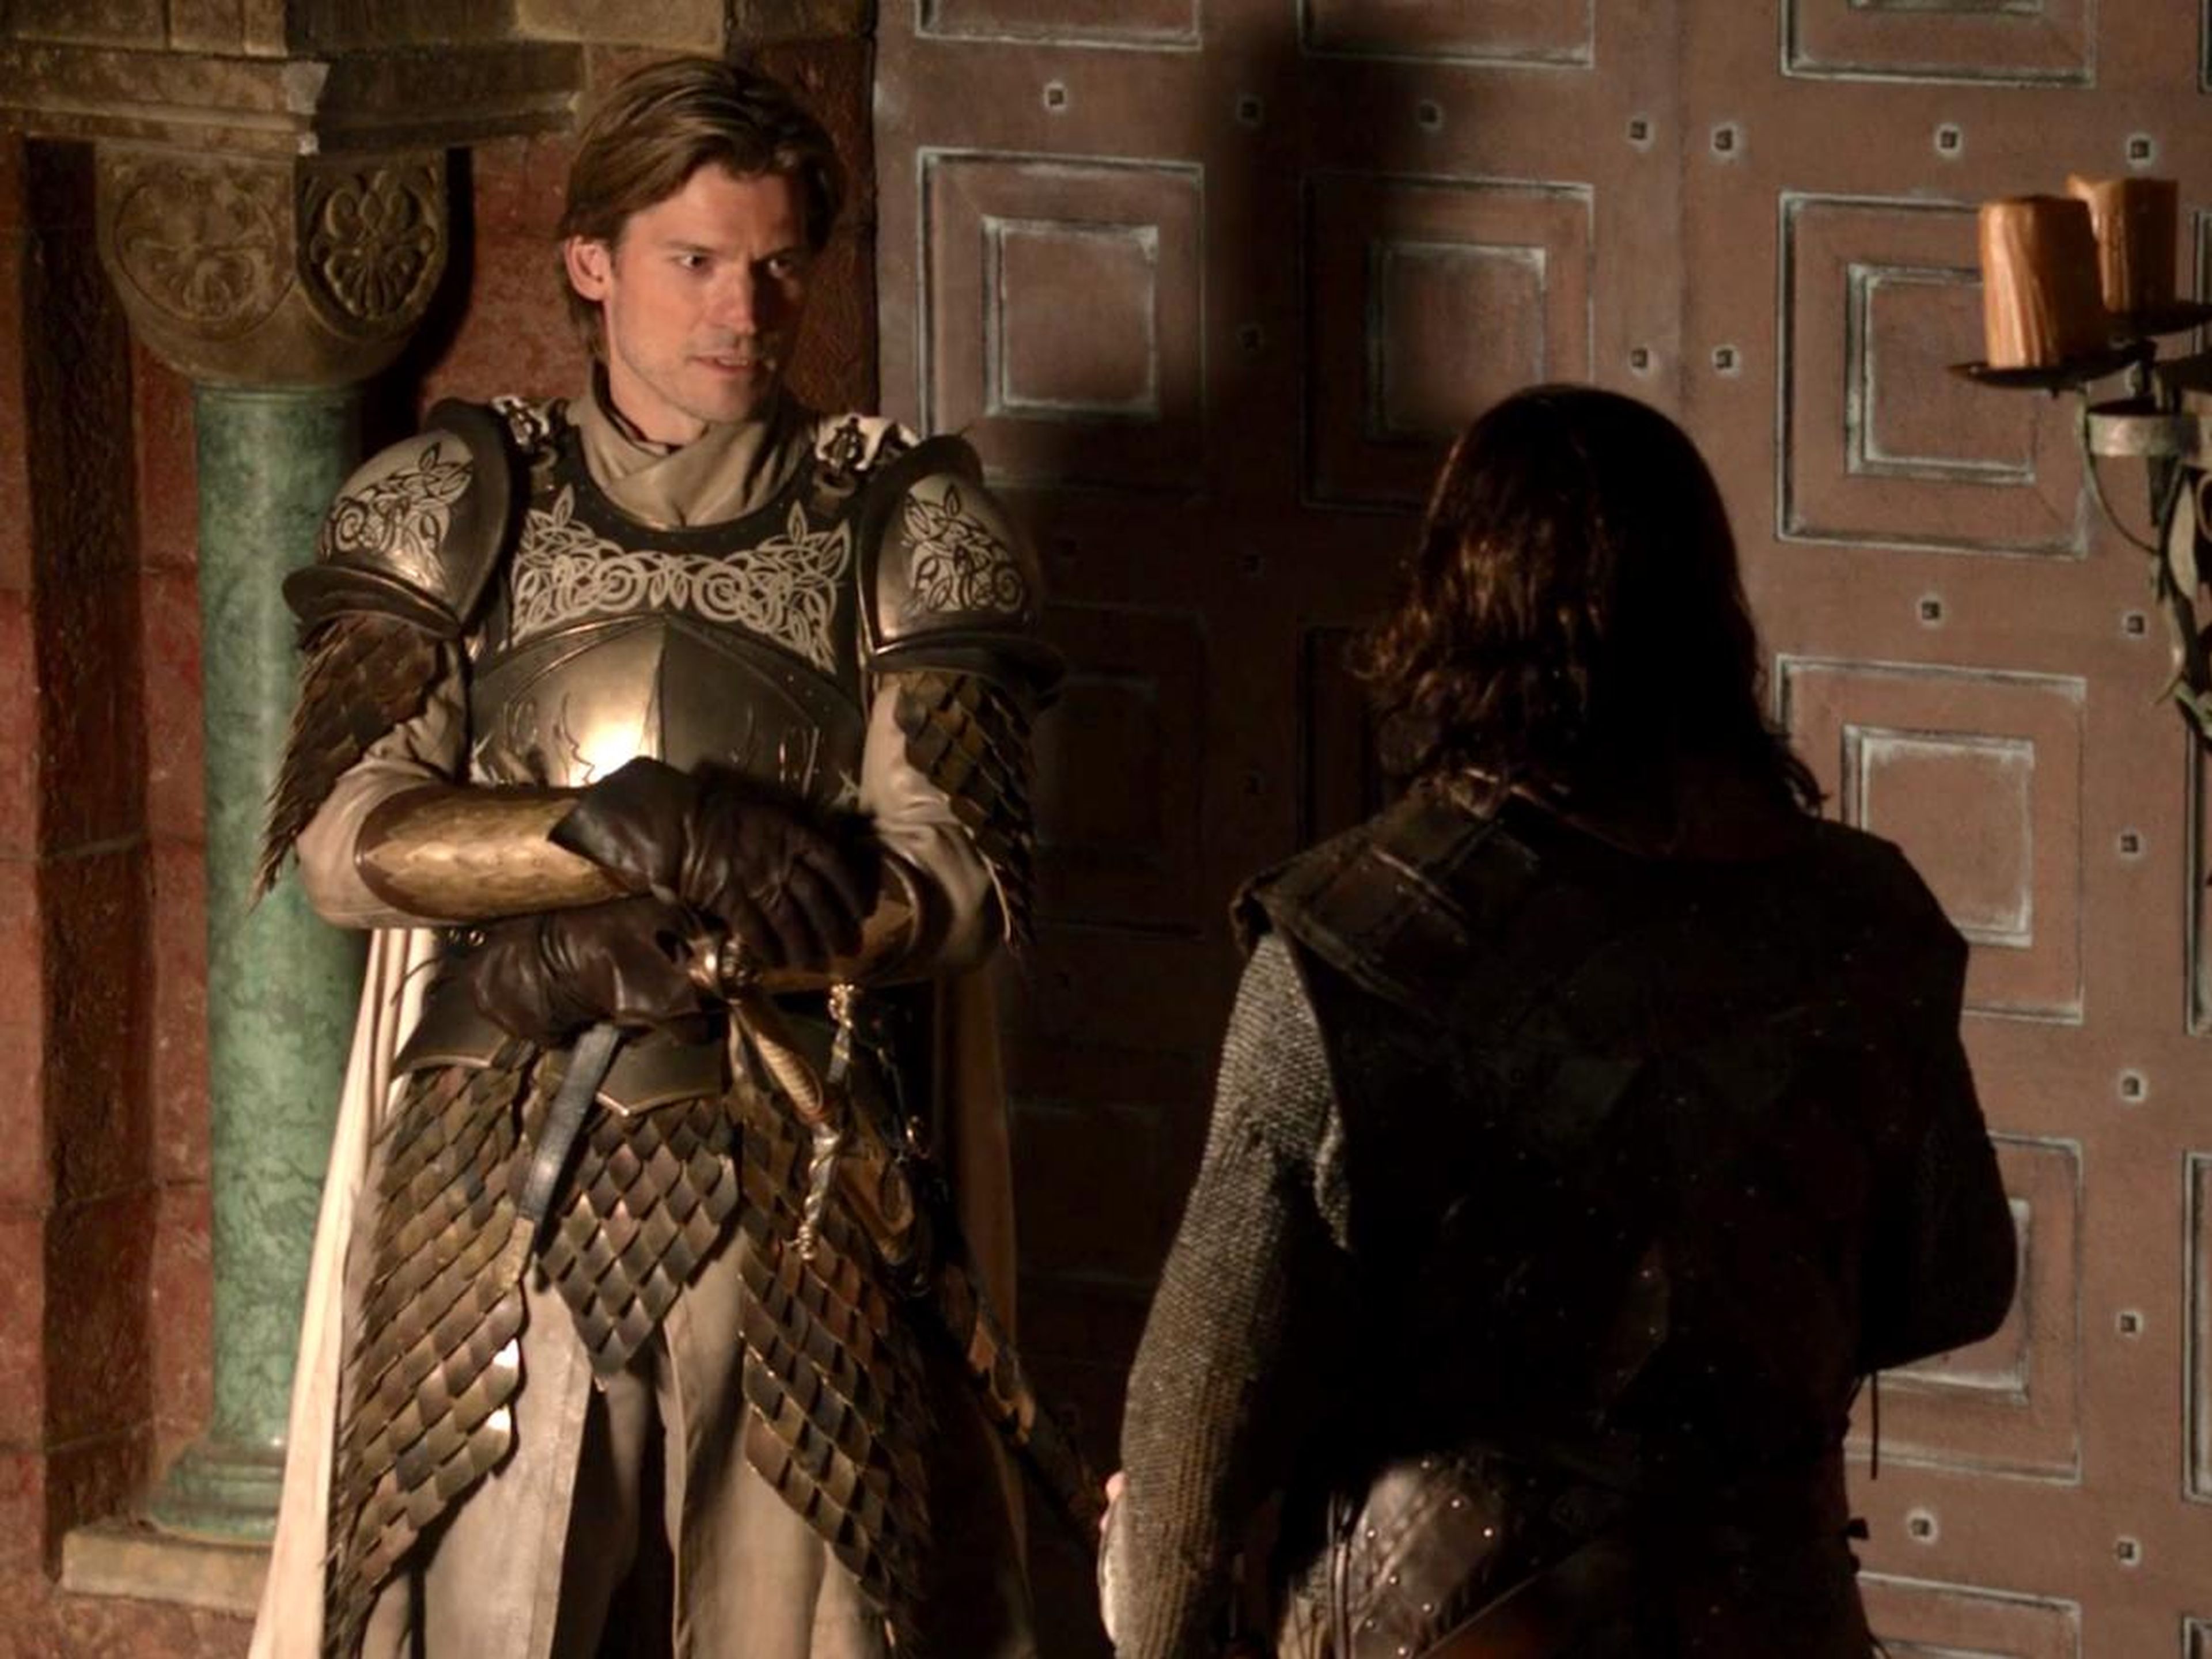 Jaime and Jory together on "Game of Thrones" season one, episode four, "Cripples, Bastards, and Broken Things."